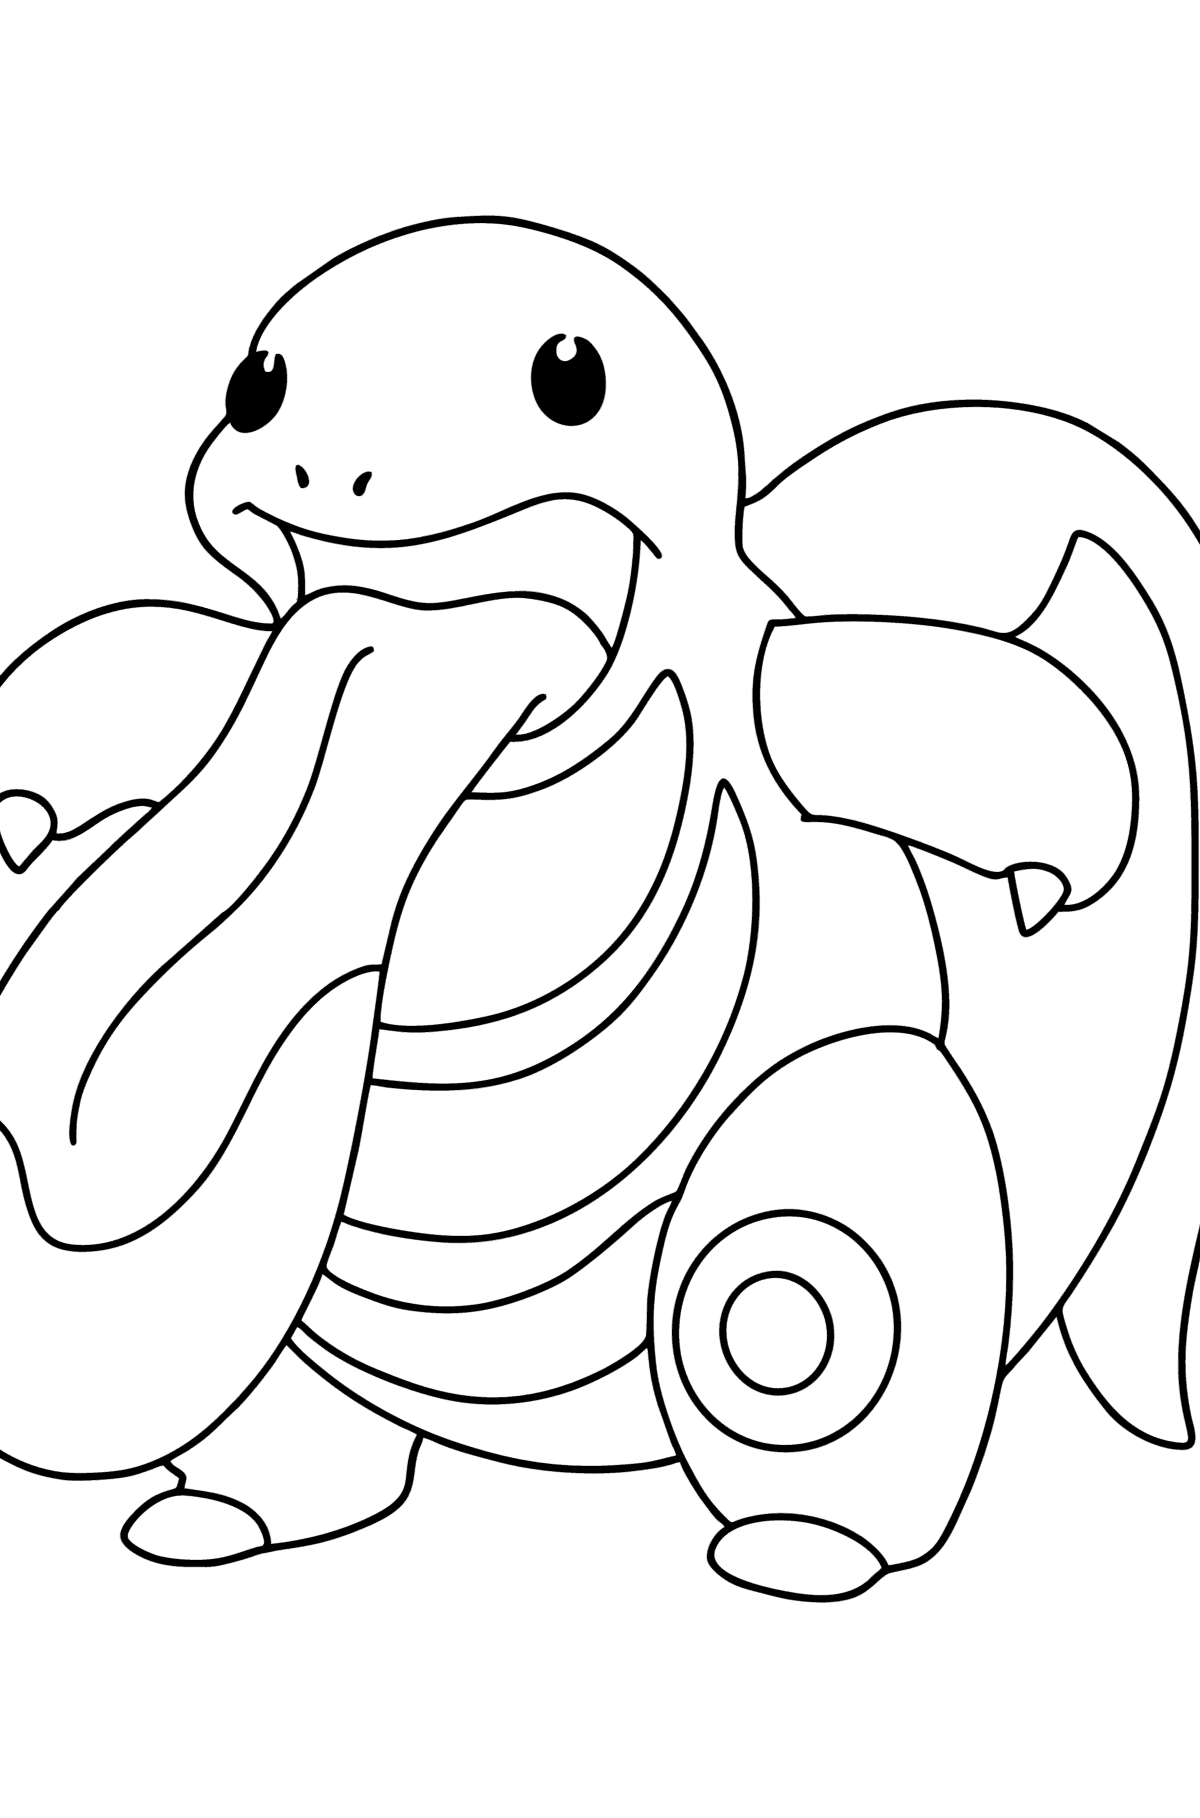 Coloring page Pokemon Go Licking - Coloring Pages for Kids